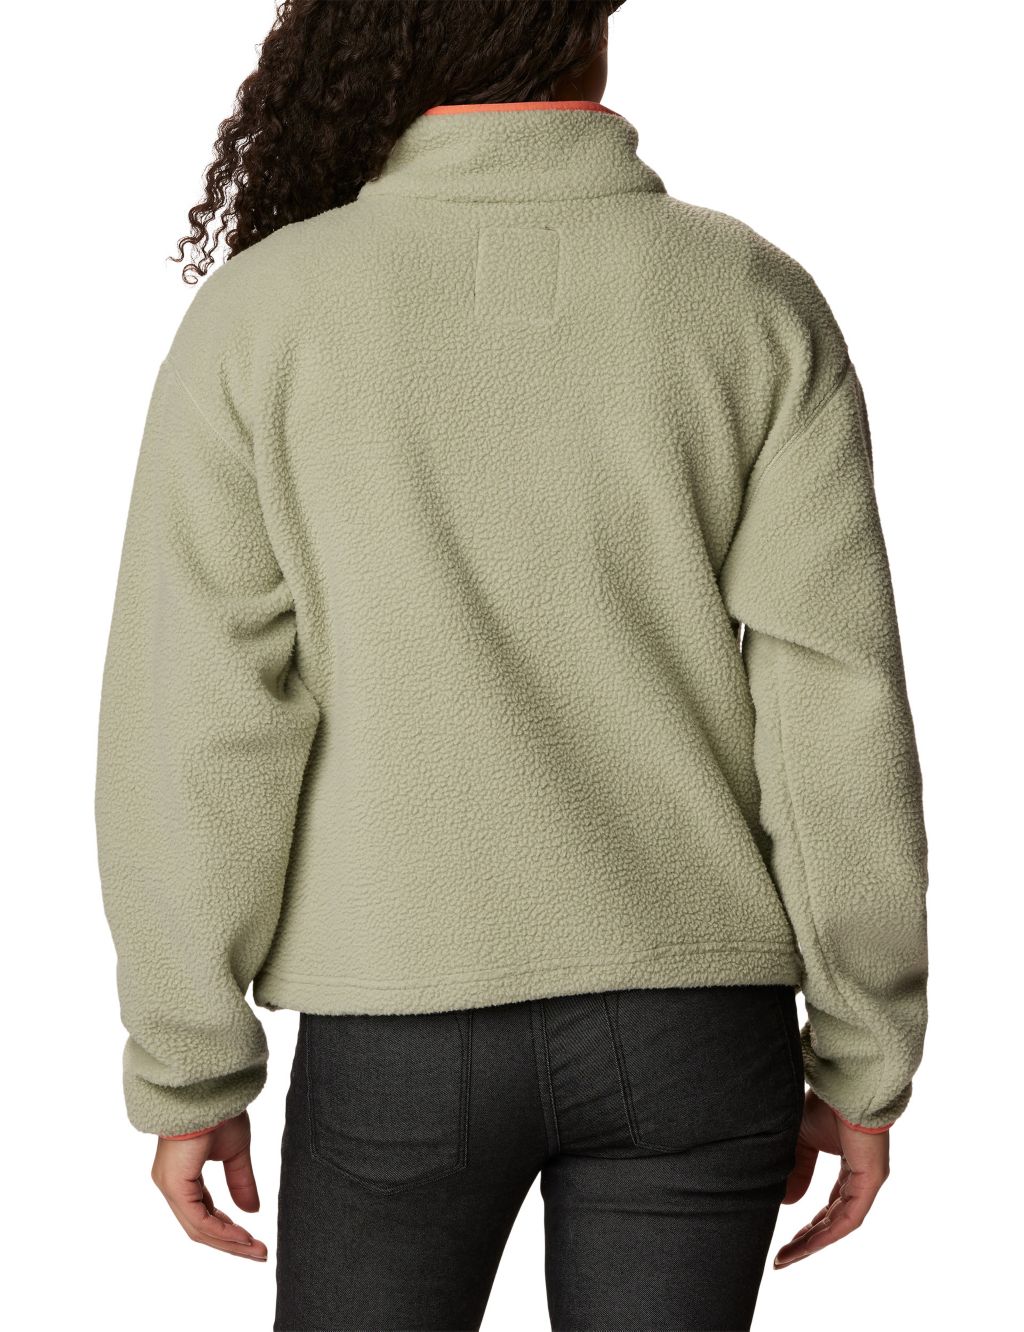 Helvetia Funnel Neck Cropped Jacket image 3